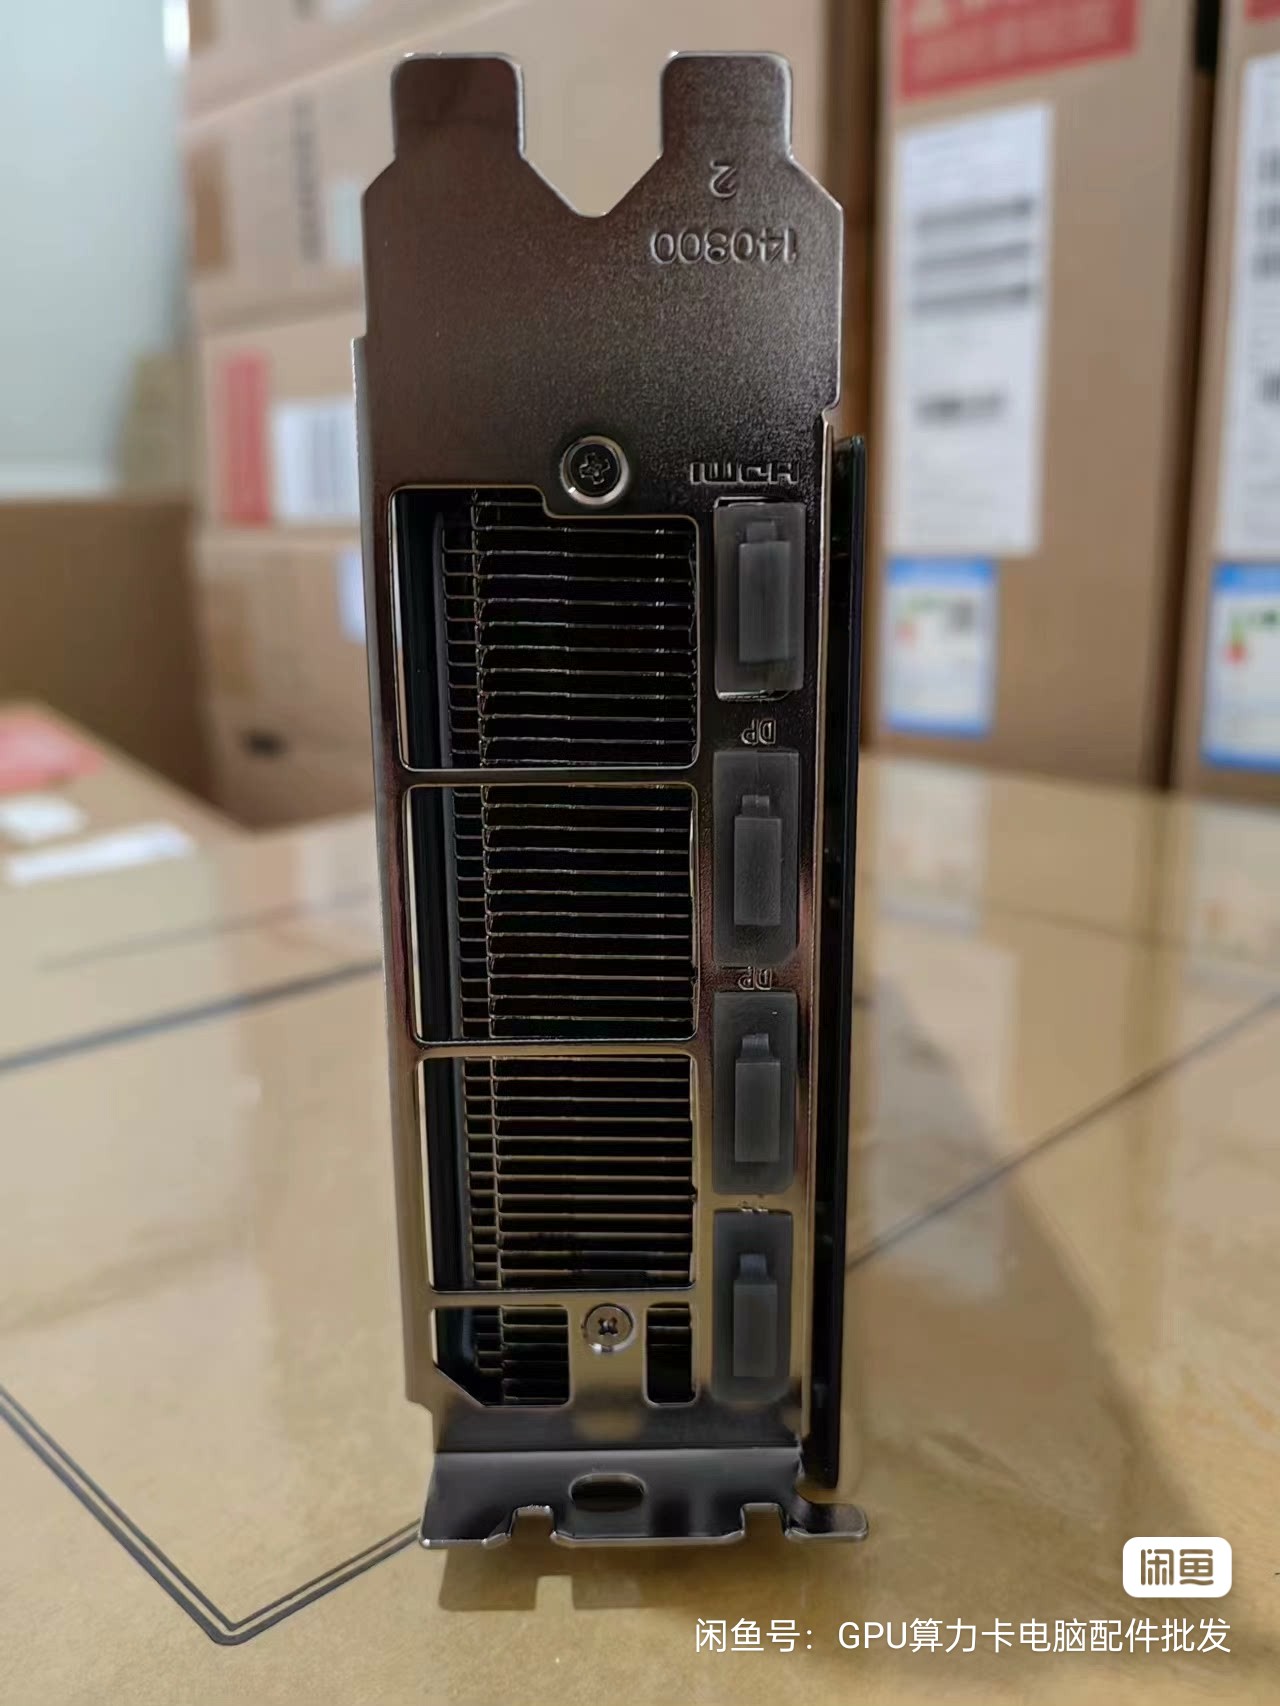 More GeForce RTX 4090 AI/blower cards spotted in China, while the